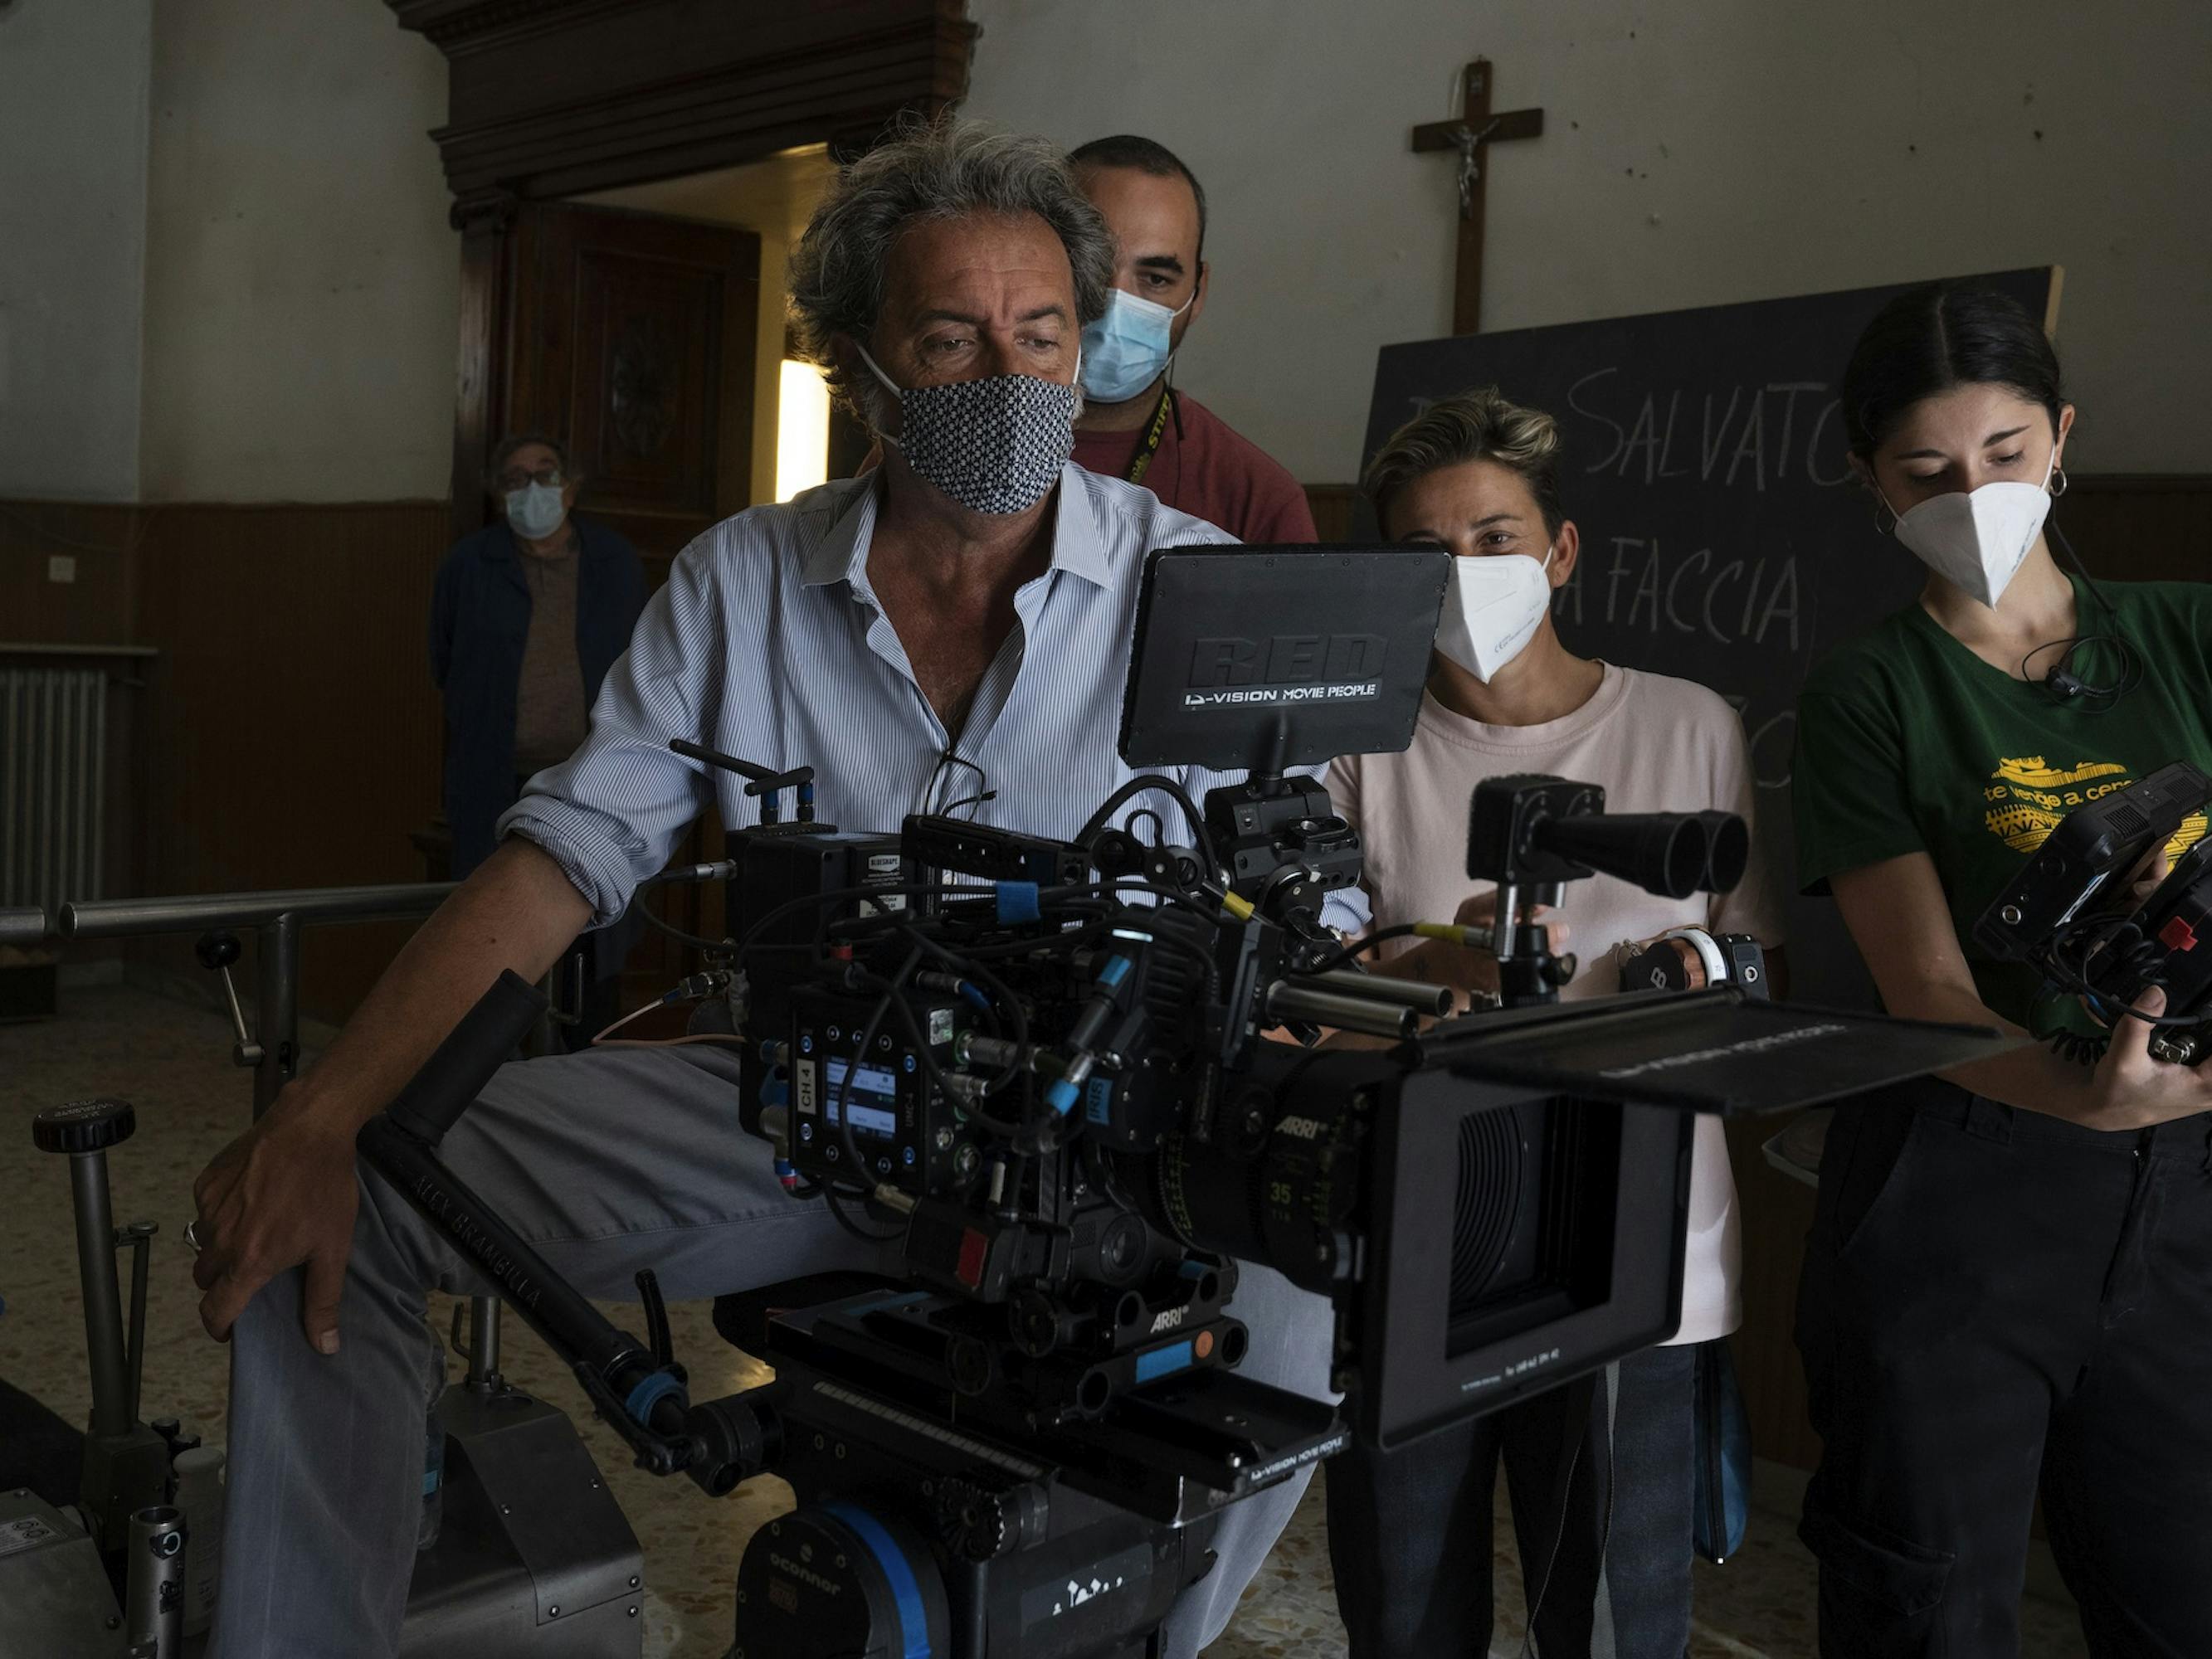 Paolo Sorrentino, Daria D’Antonio, and The Hand of God crew stand around camera gear, masked.